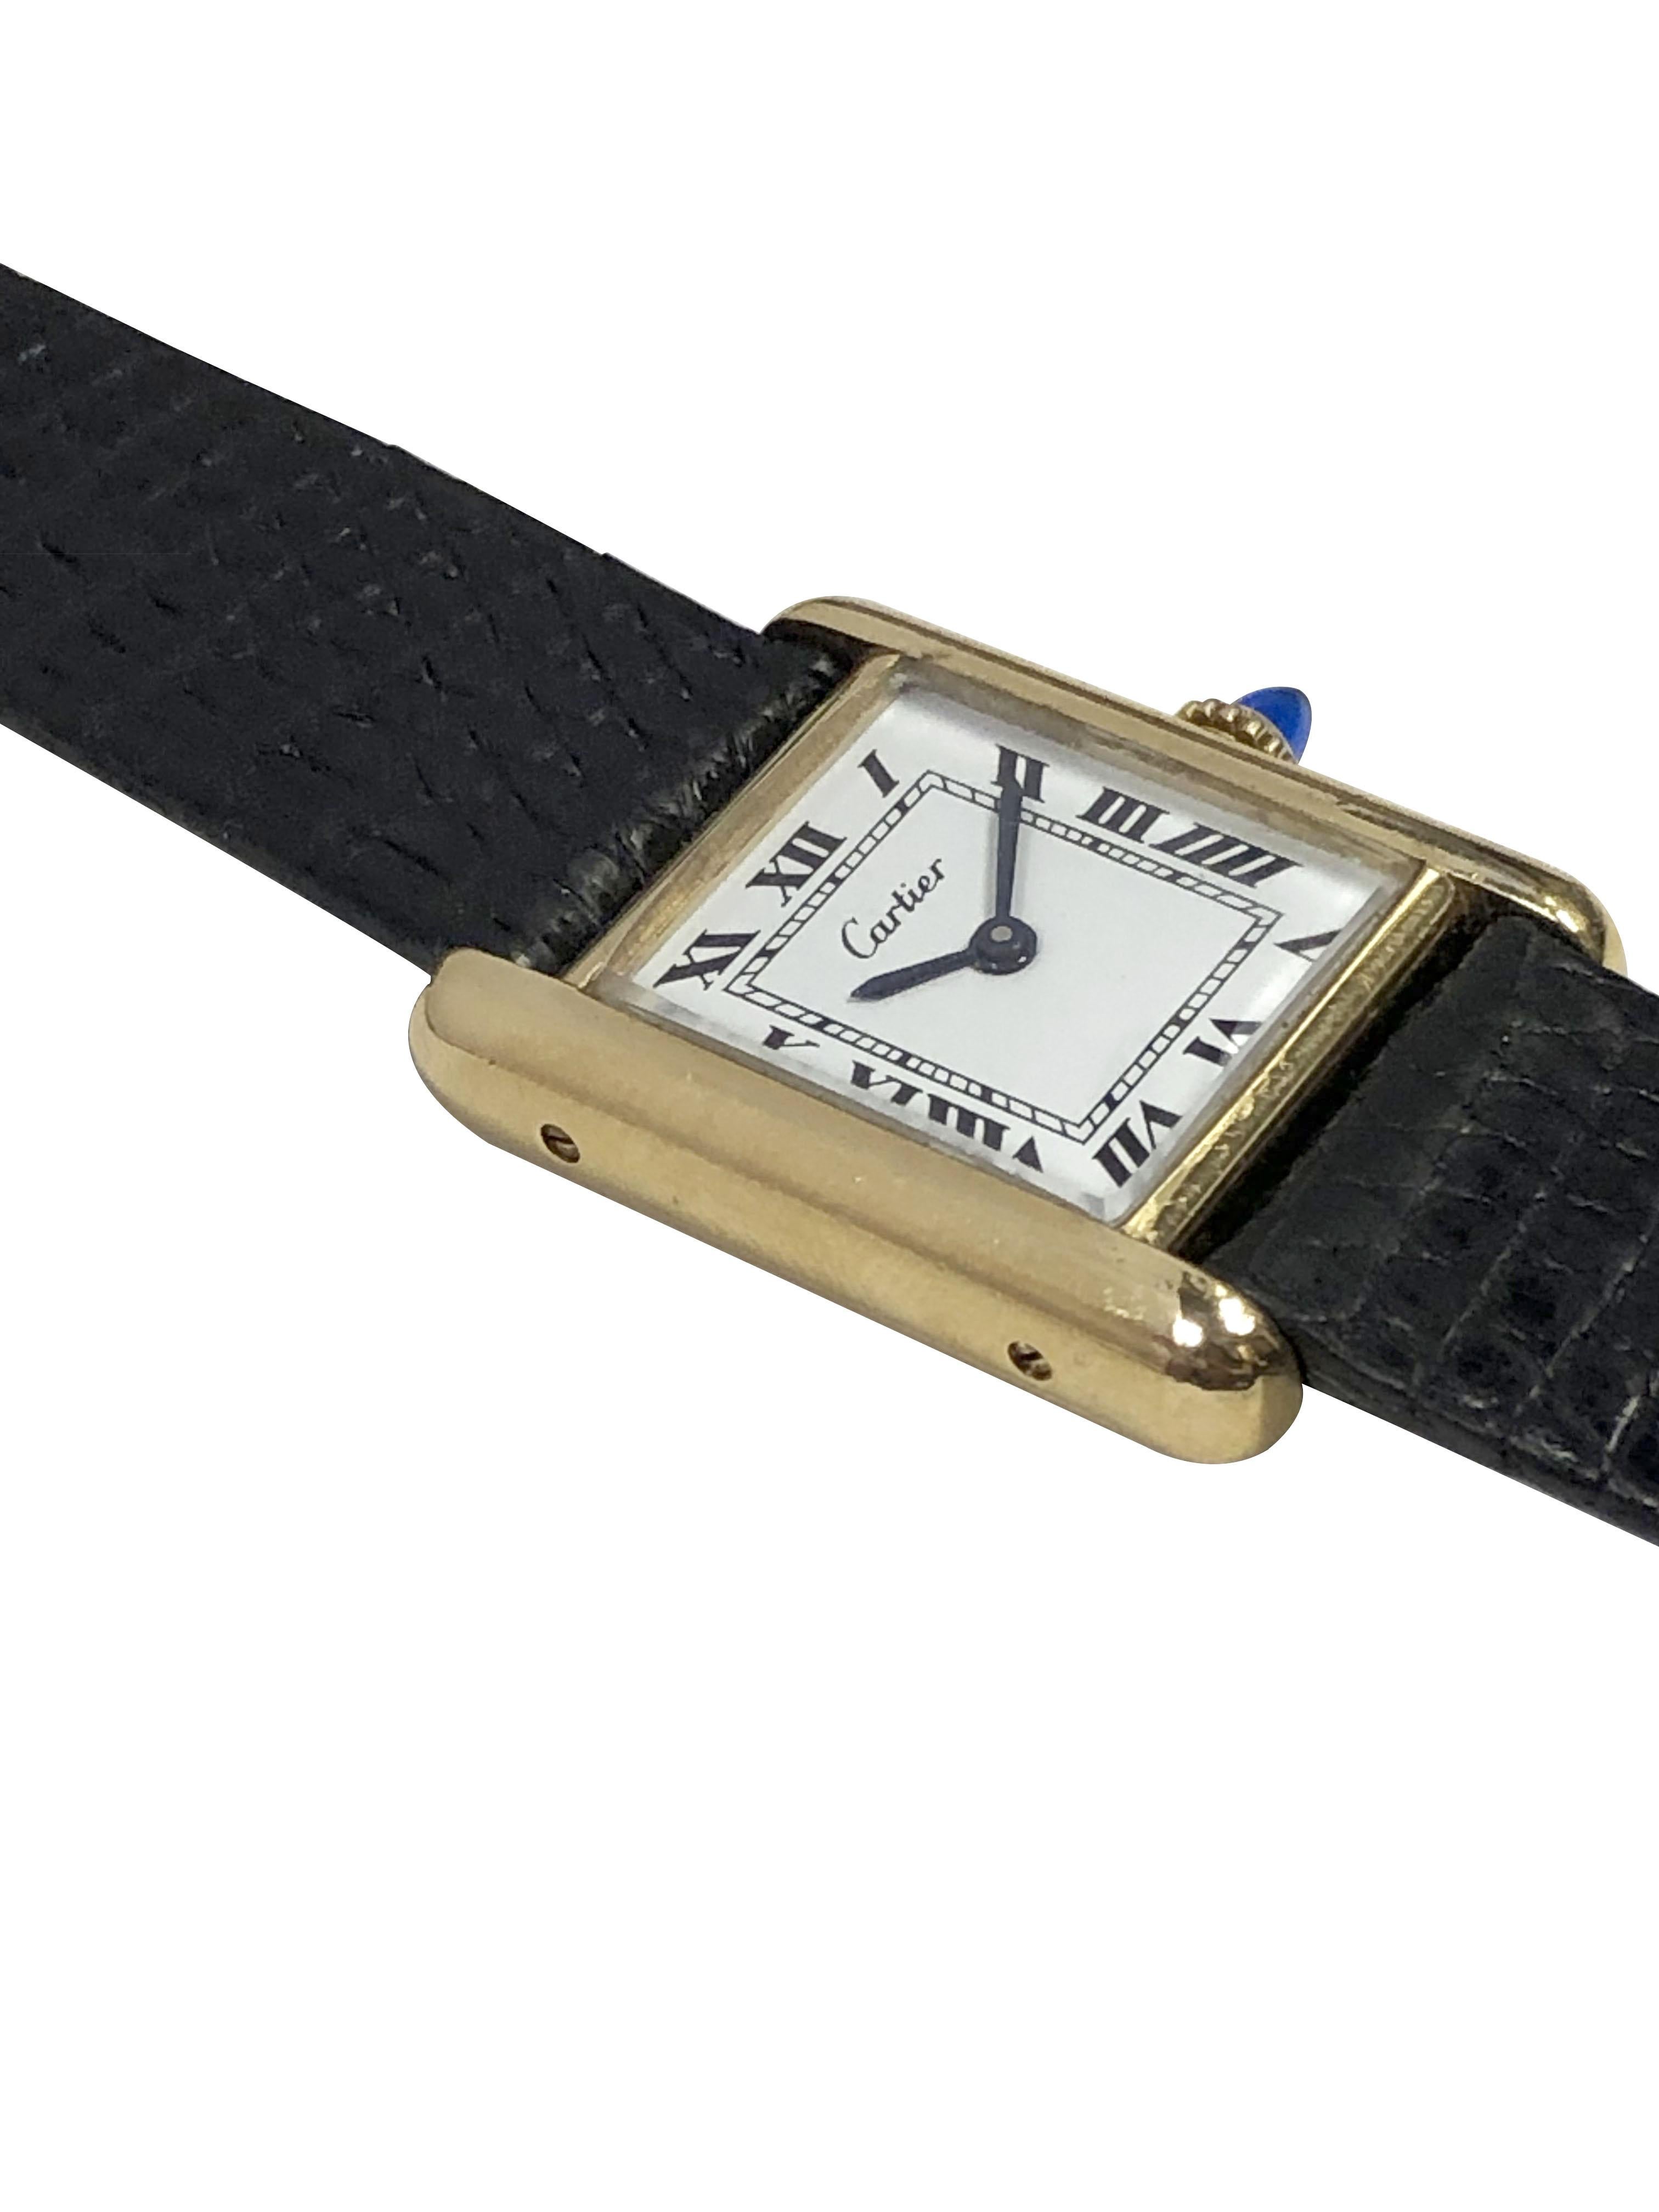 Circa 1980s Cartier Ladies Wrist Watch, 28 X 20 M.M. 2 Piece Gold Plaque Case,17 Jewel Mechanical, Manual wind movement, Sapphire Crown, White Dial with Black Roman Numerals. New Black Lizard Strap. Wrist length 8 inches. Comes in a Cartier Travel